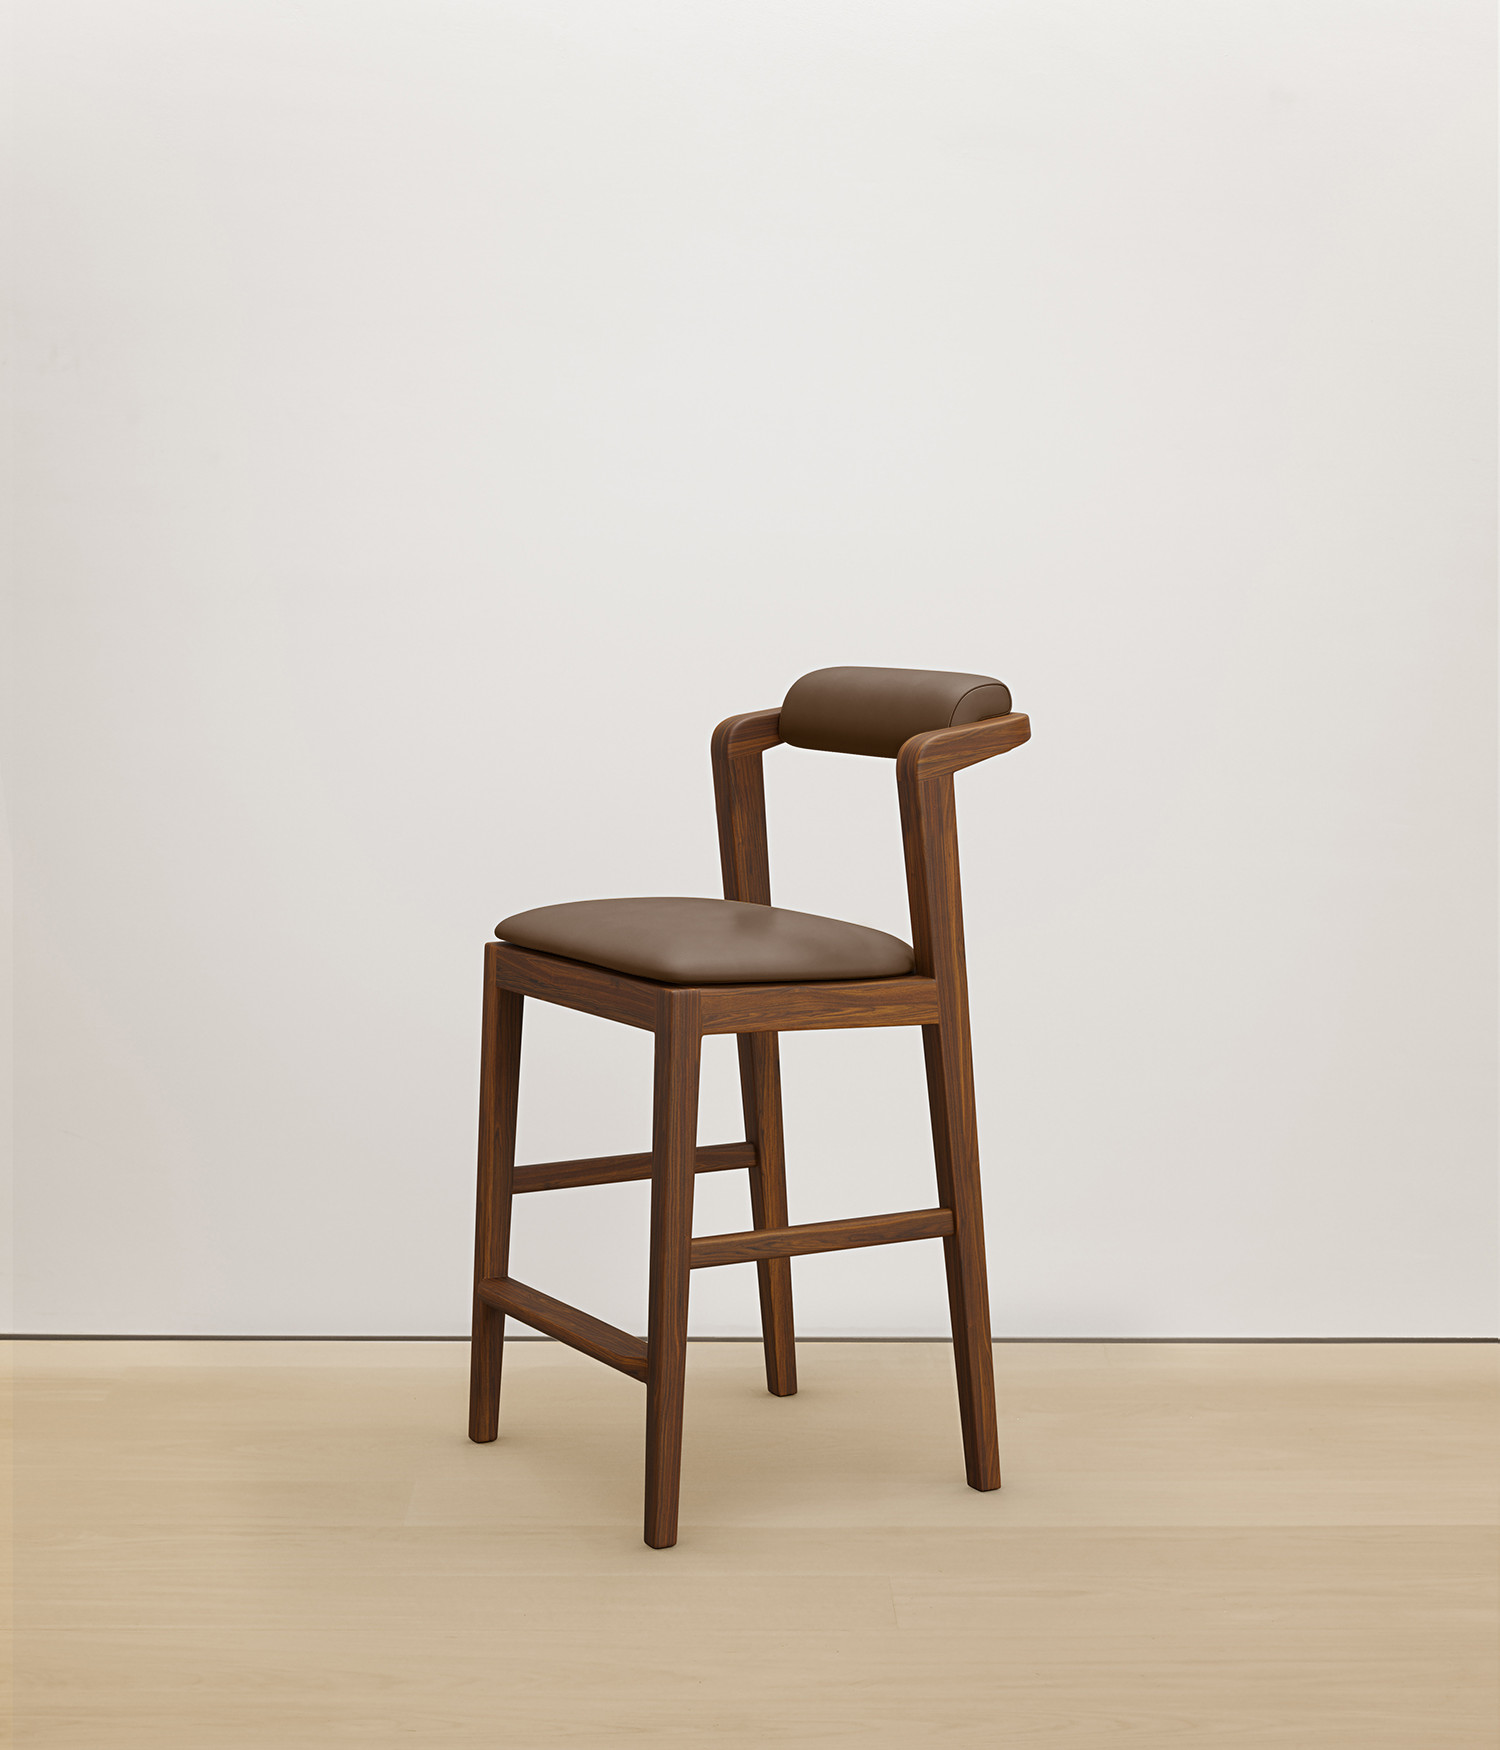  walnut stool with umber color upholstered seat